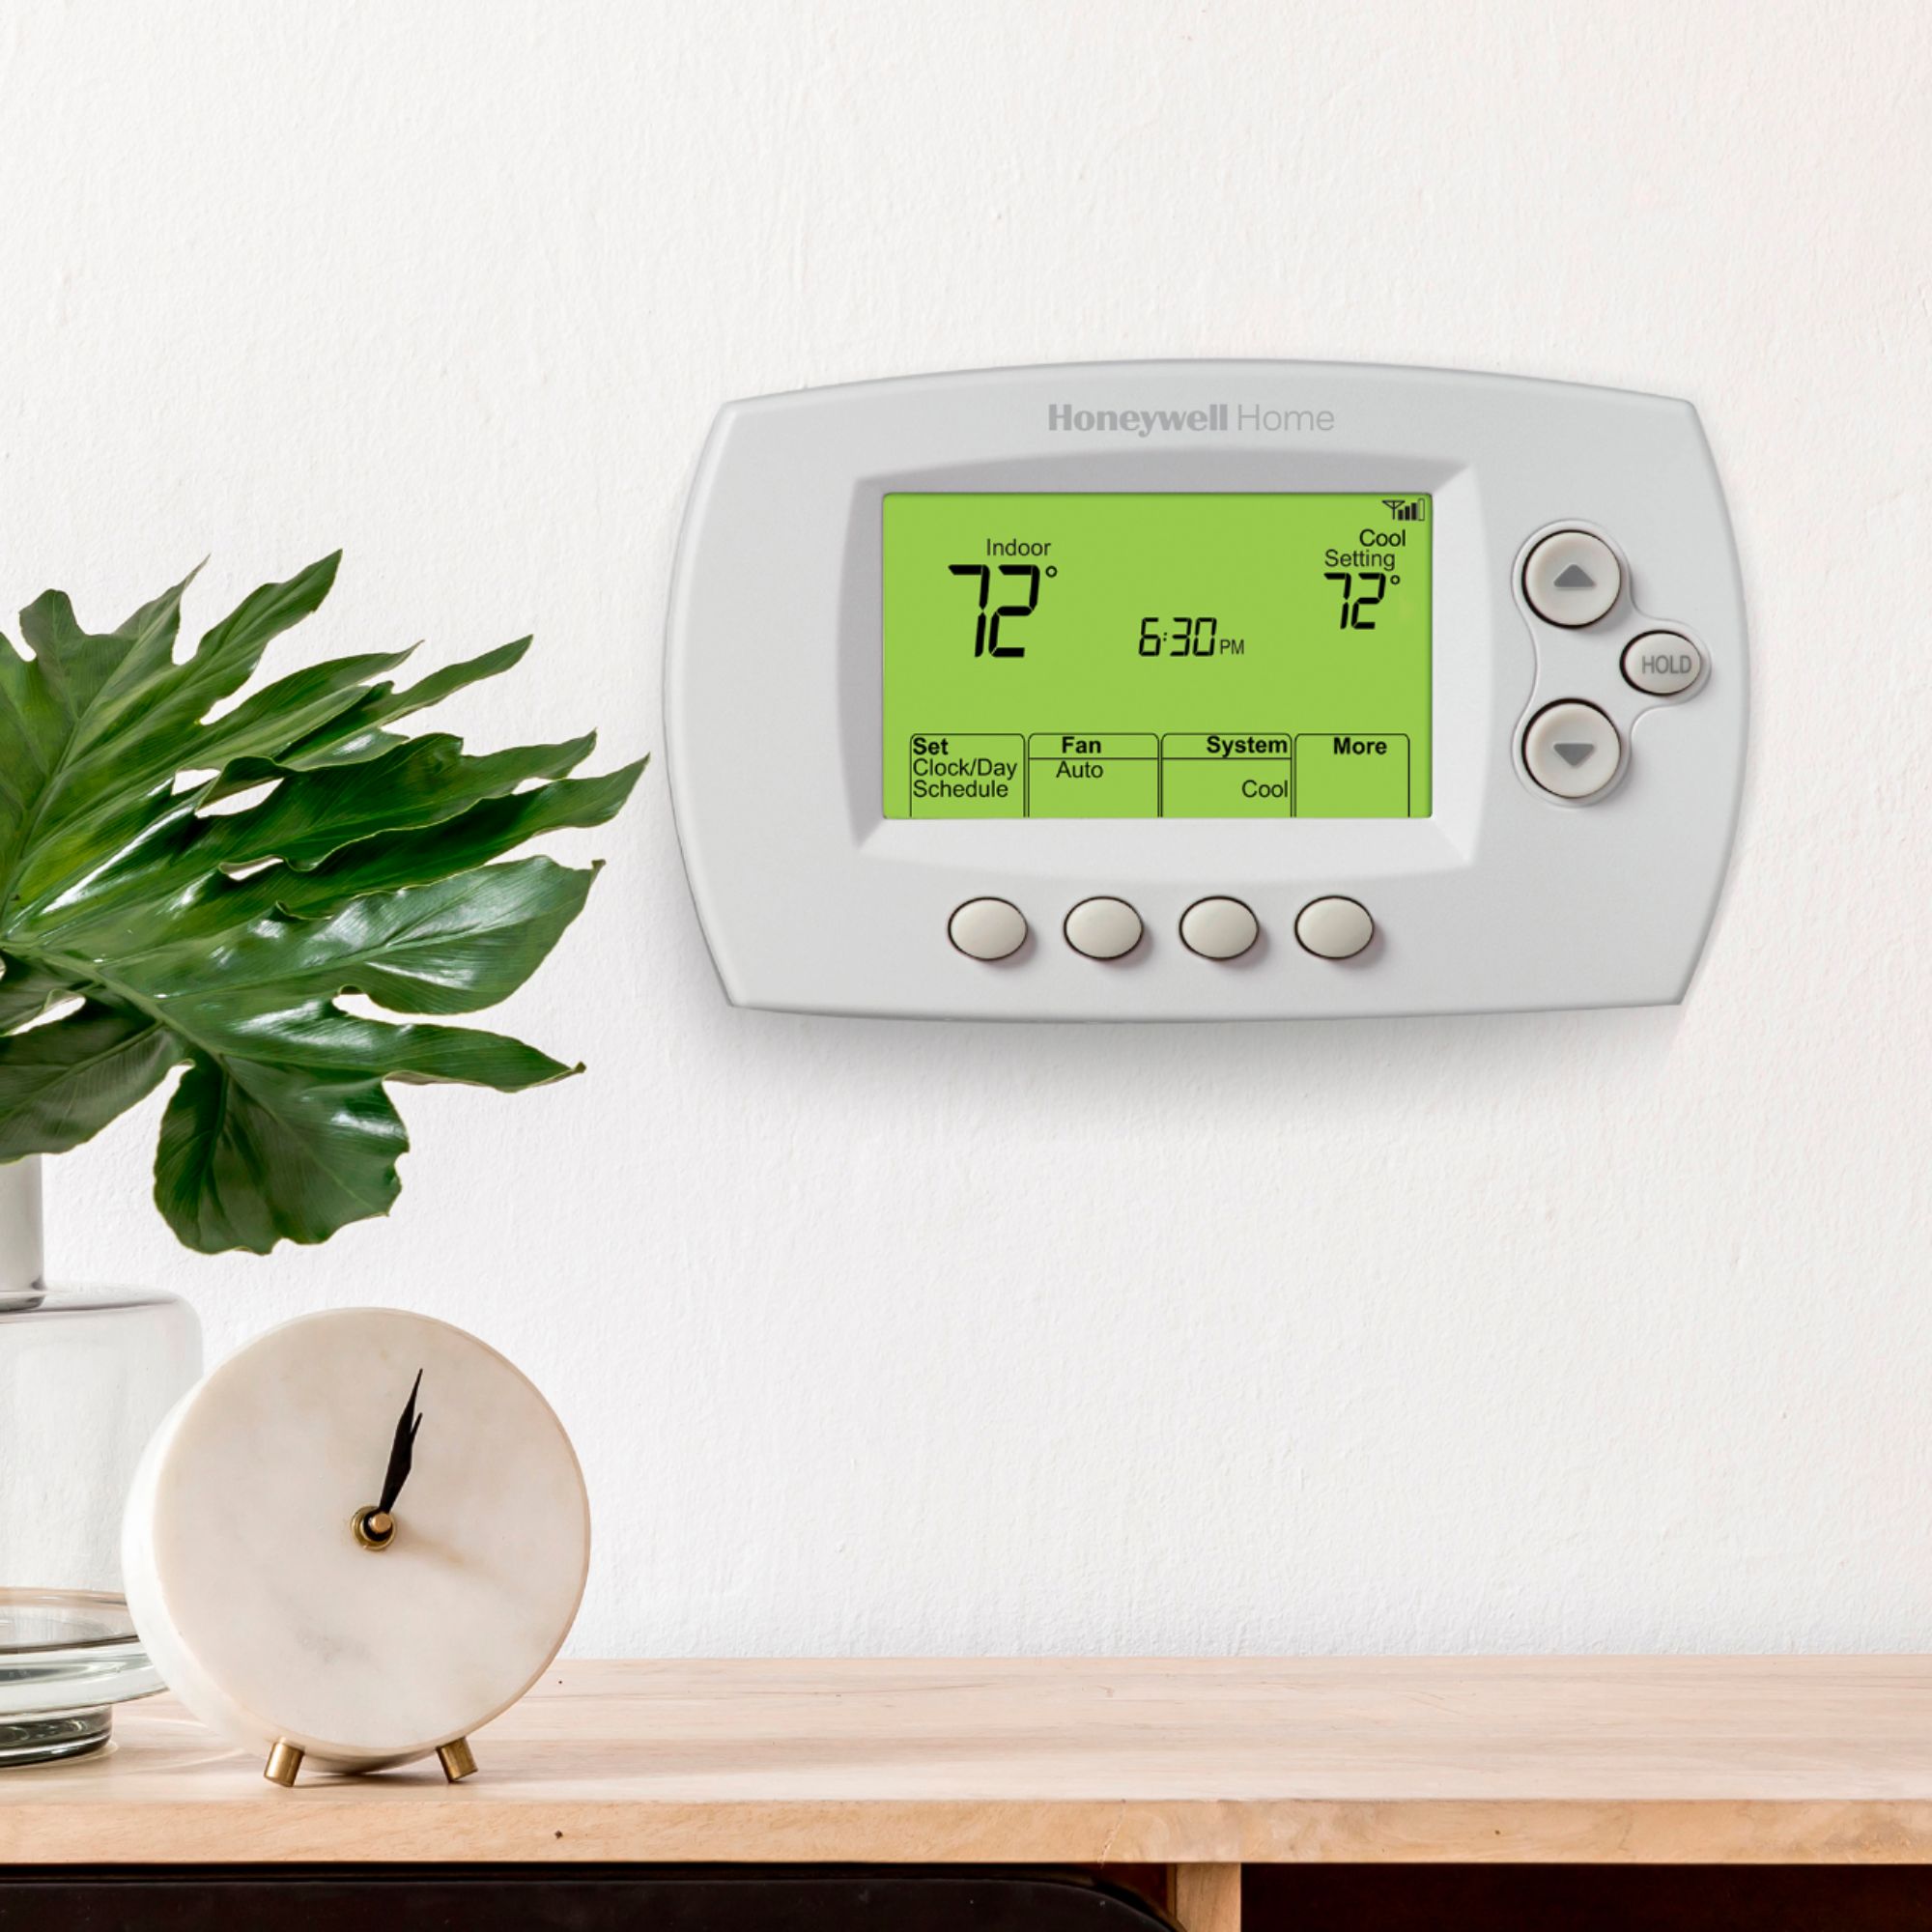 Honeywell Home 7-Day Programmable Thermostat with Wi-Fi Capability